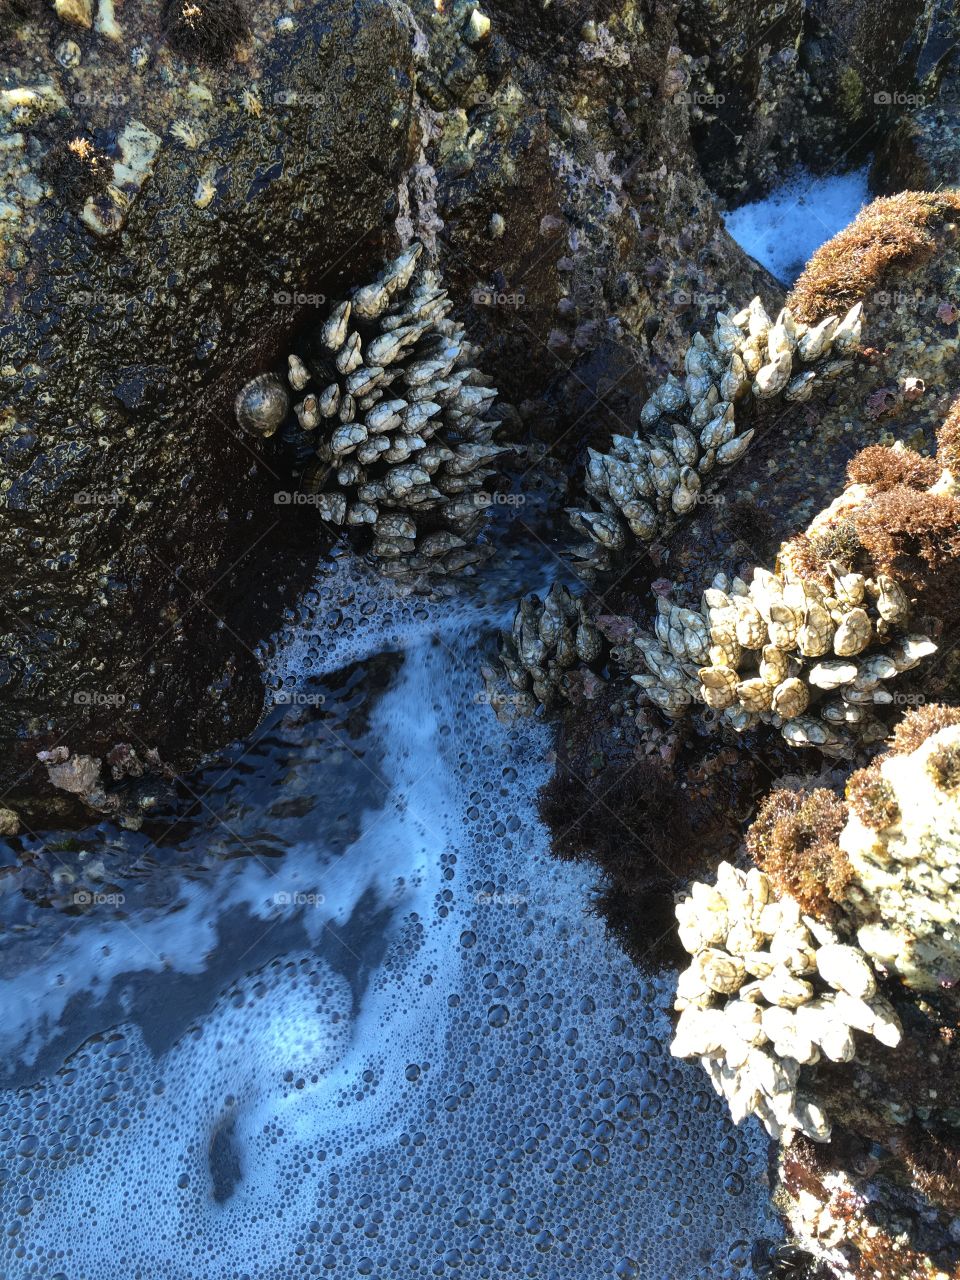 Shells attached to rocks in a tide pool filled with frothy water